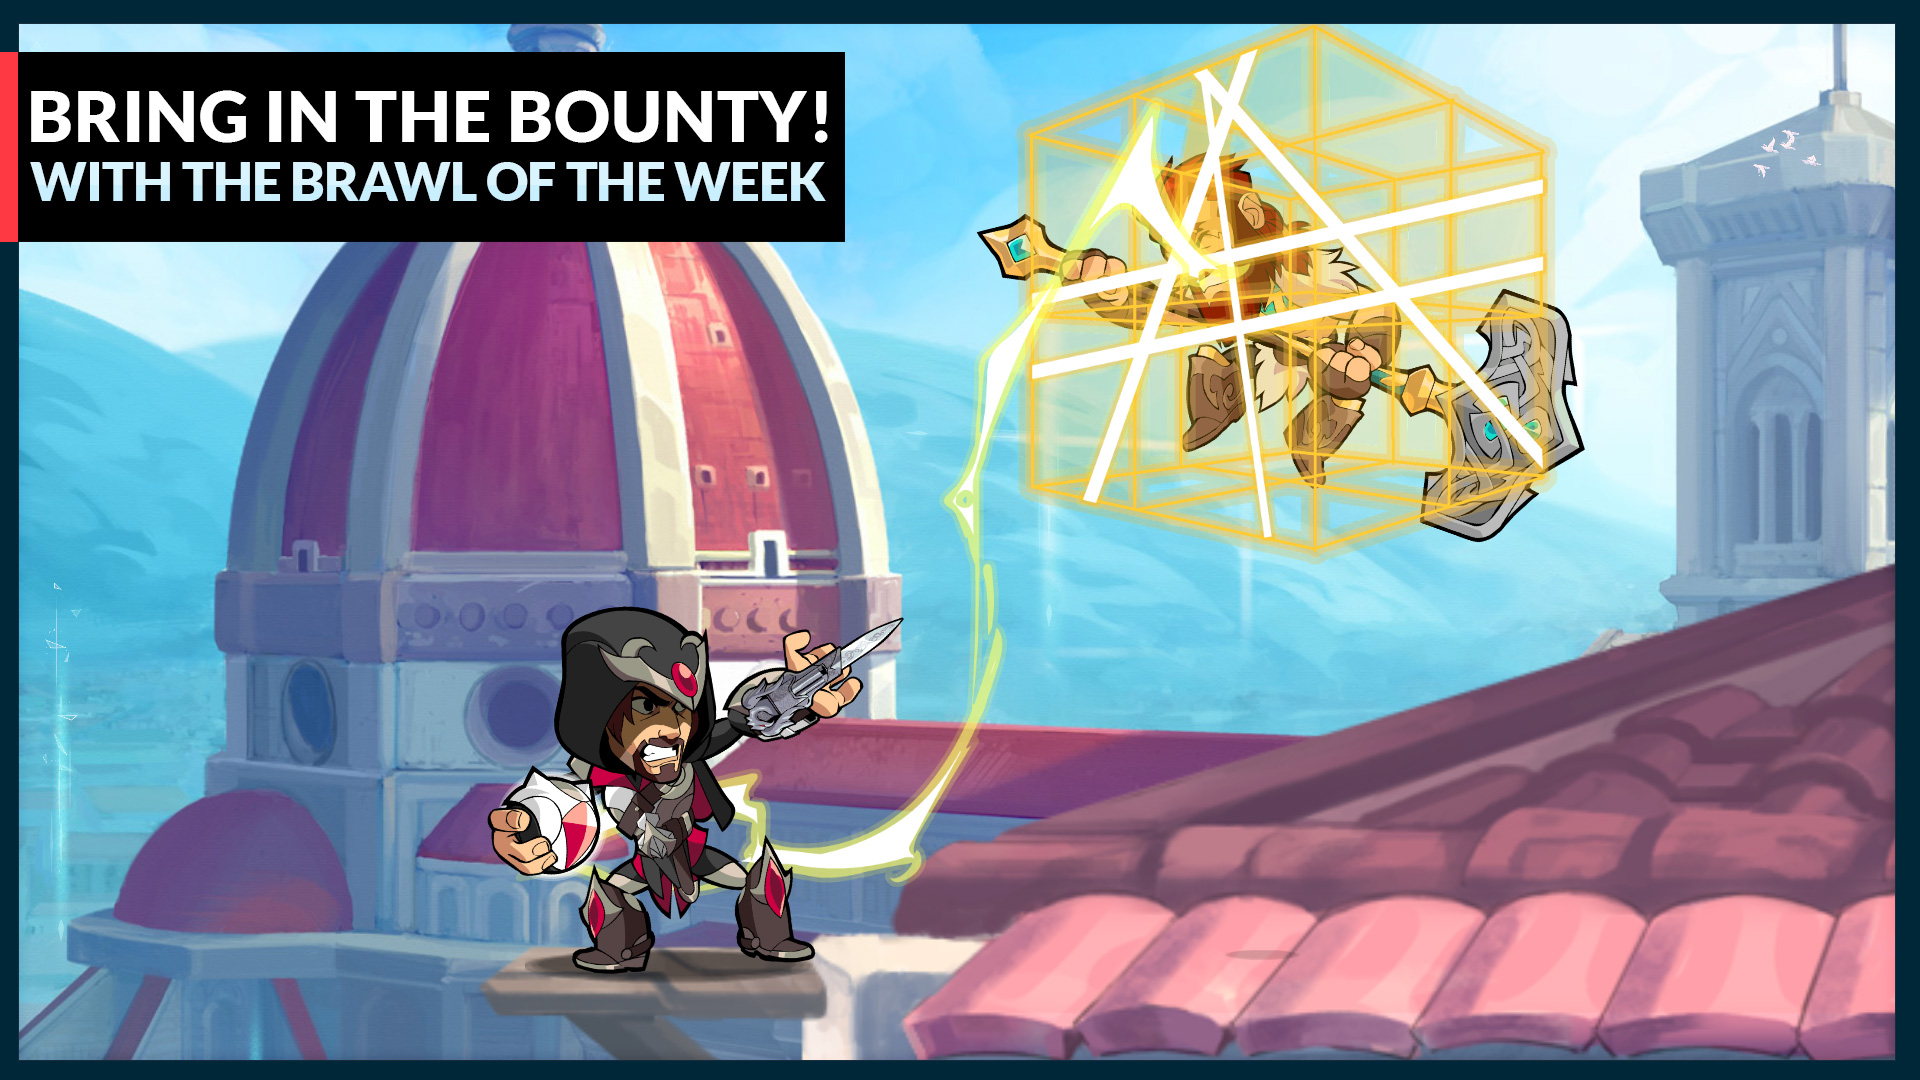 Bring in the Score of a Lifetime in Bounty Hunting!